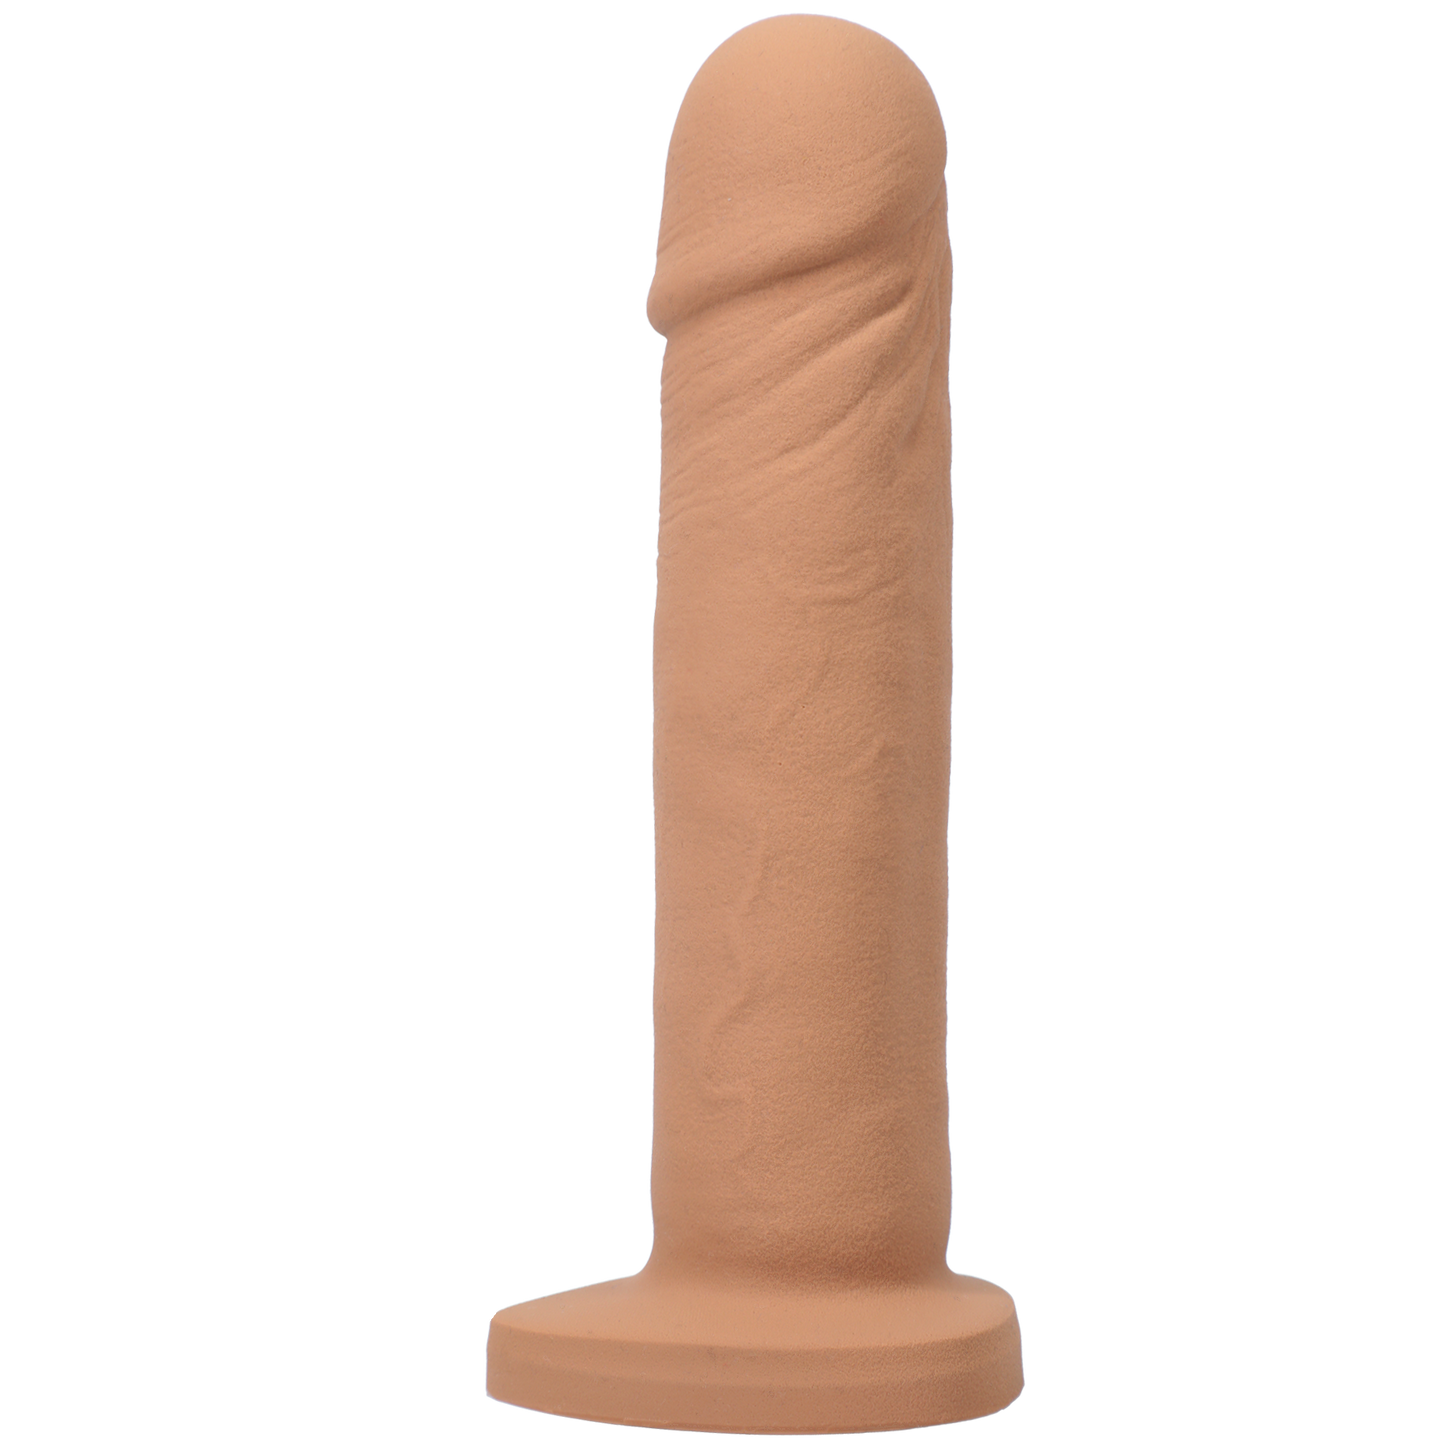 Silicone Alan O2 Dildo Vibrating Kit with Suction Cup